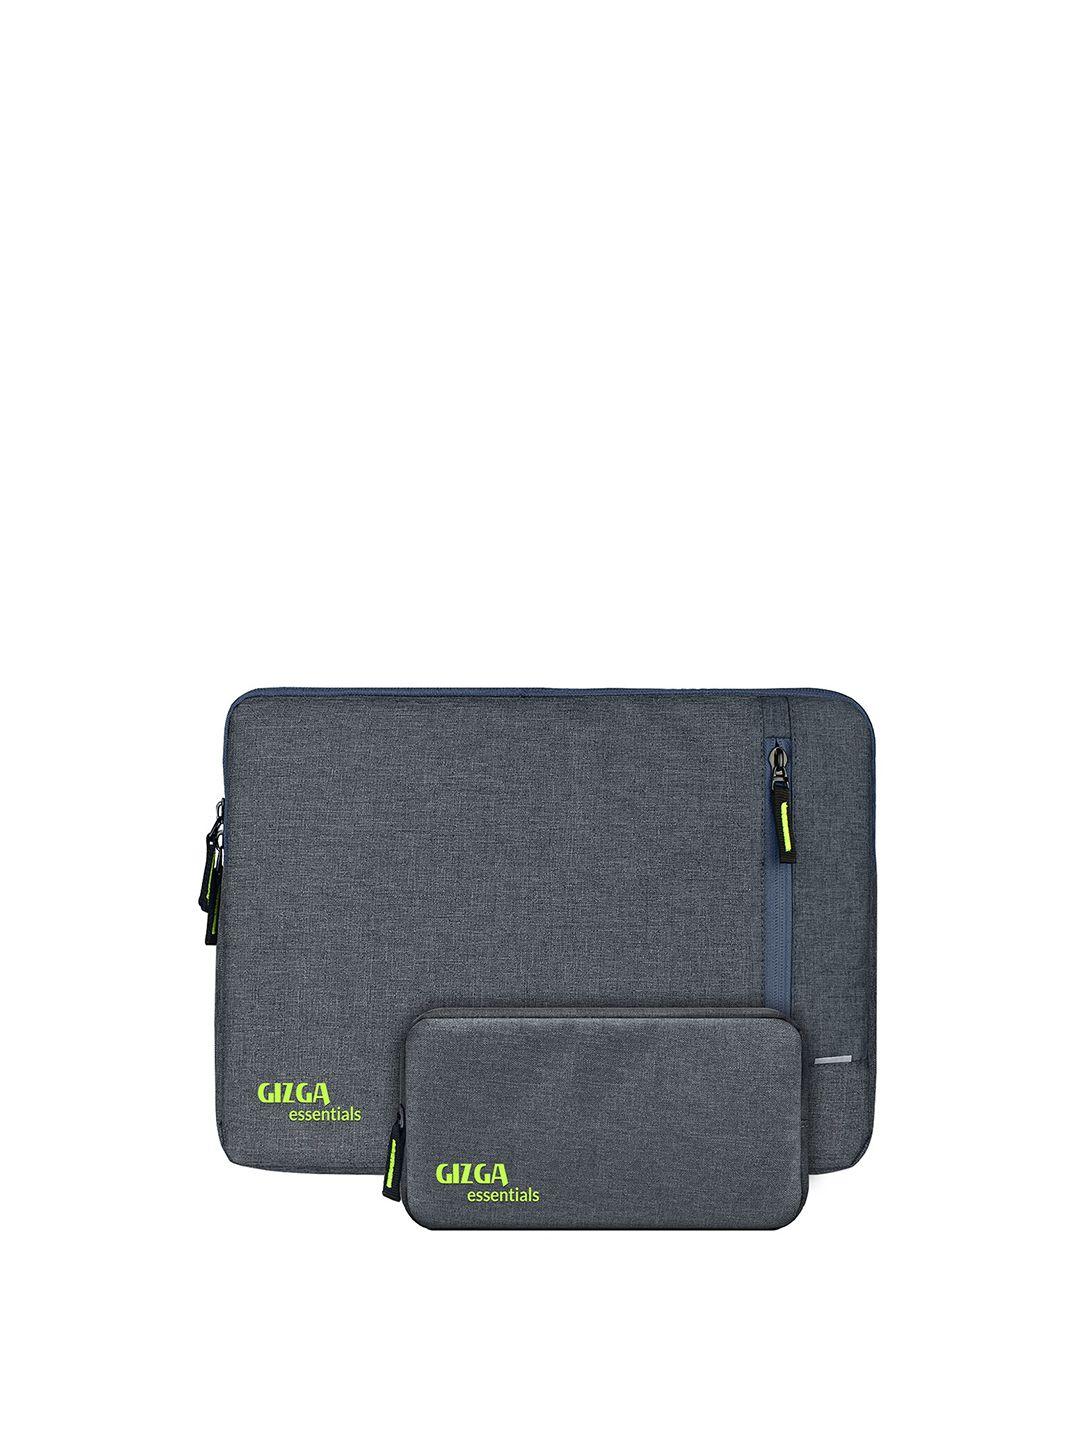 gizga essentials unisex grey solid laptop sleeve with pouch